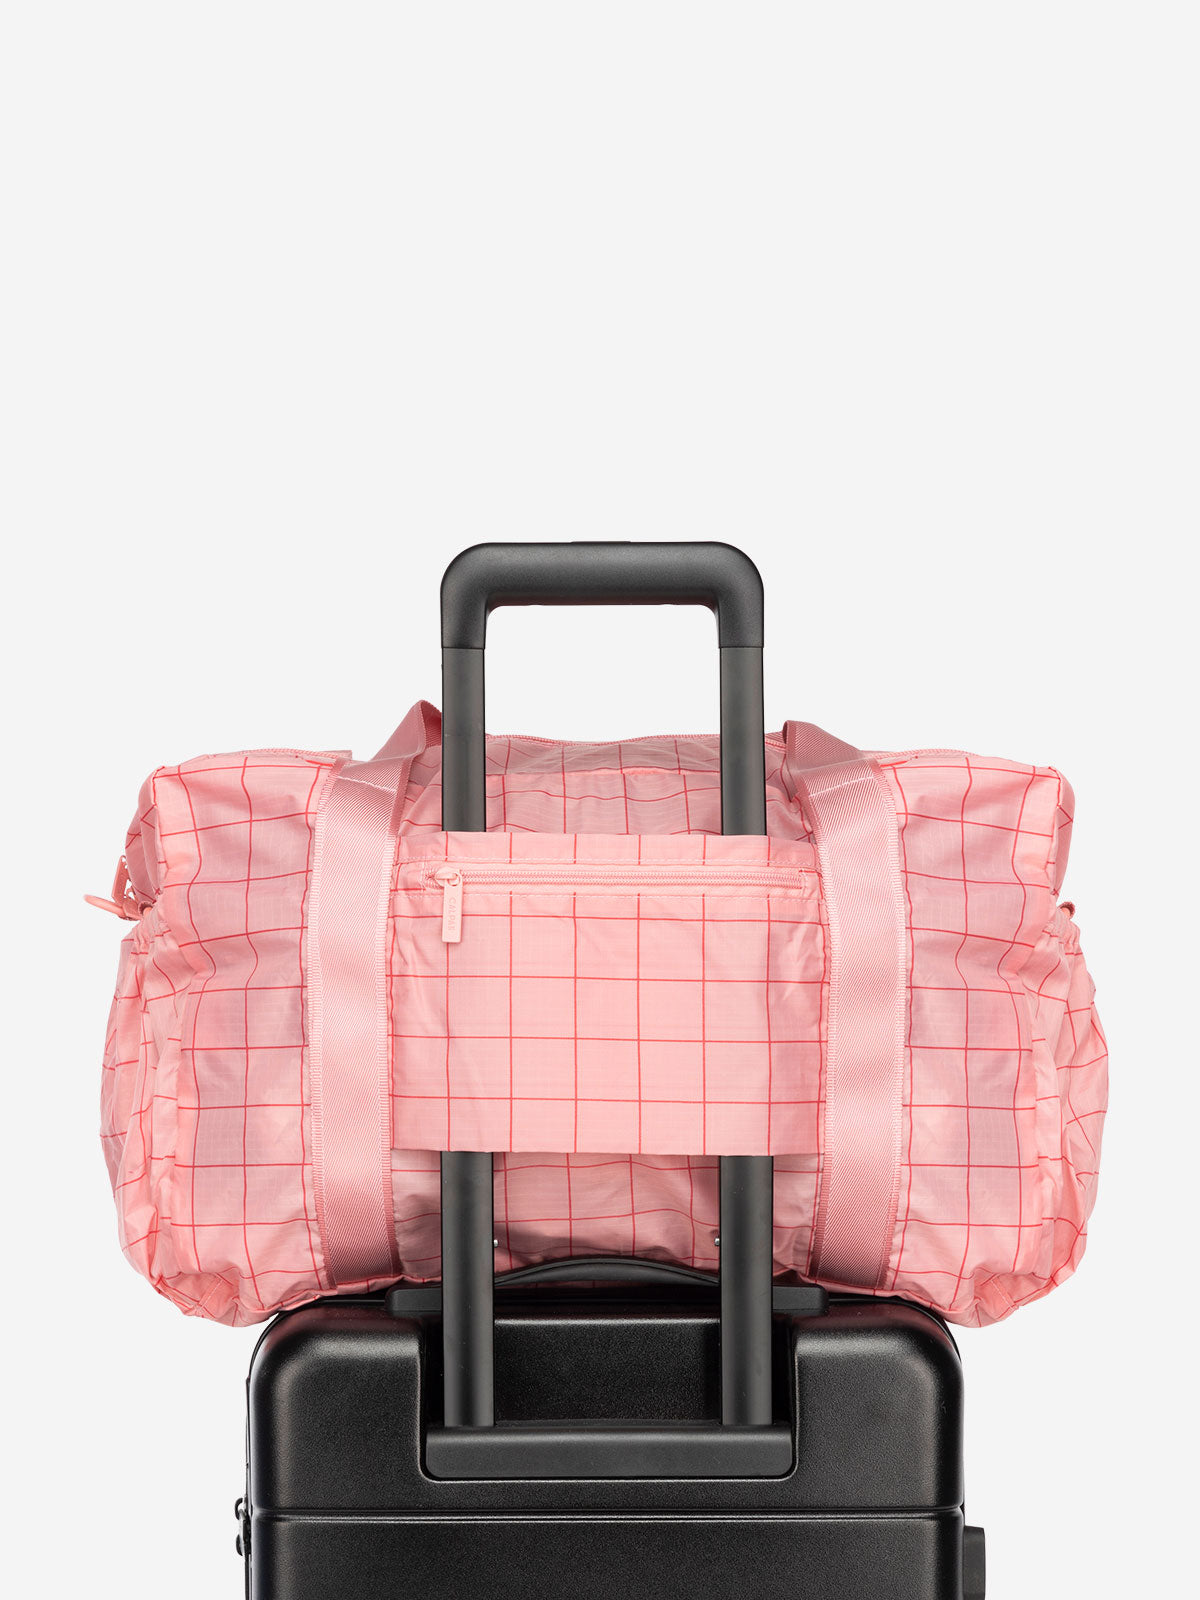 CALPAK Compakt nylon duffle bag with trolley sleeve and zippered pocket in pink grid pattern